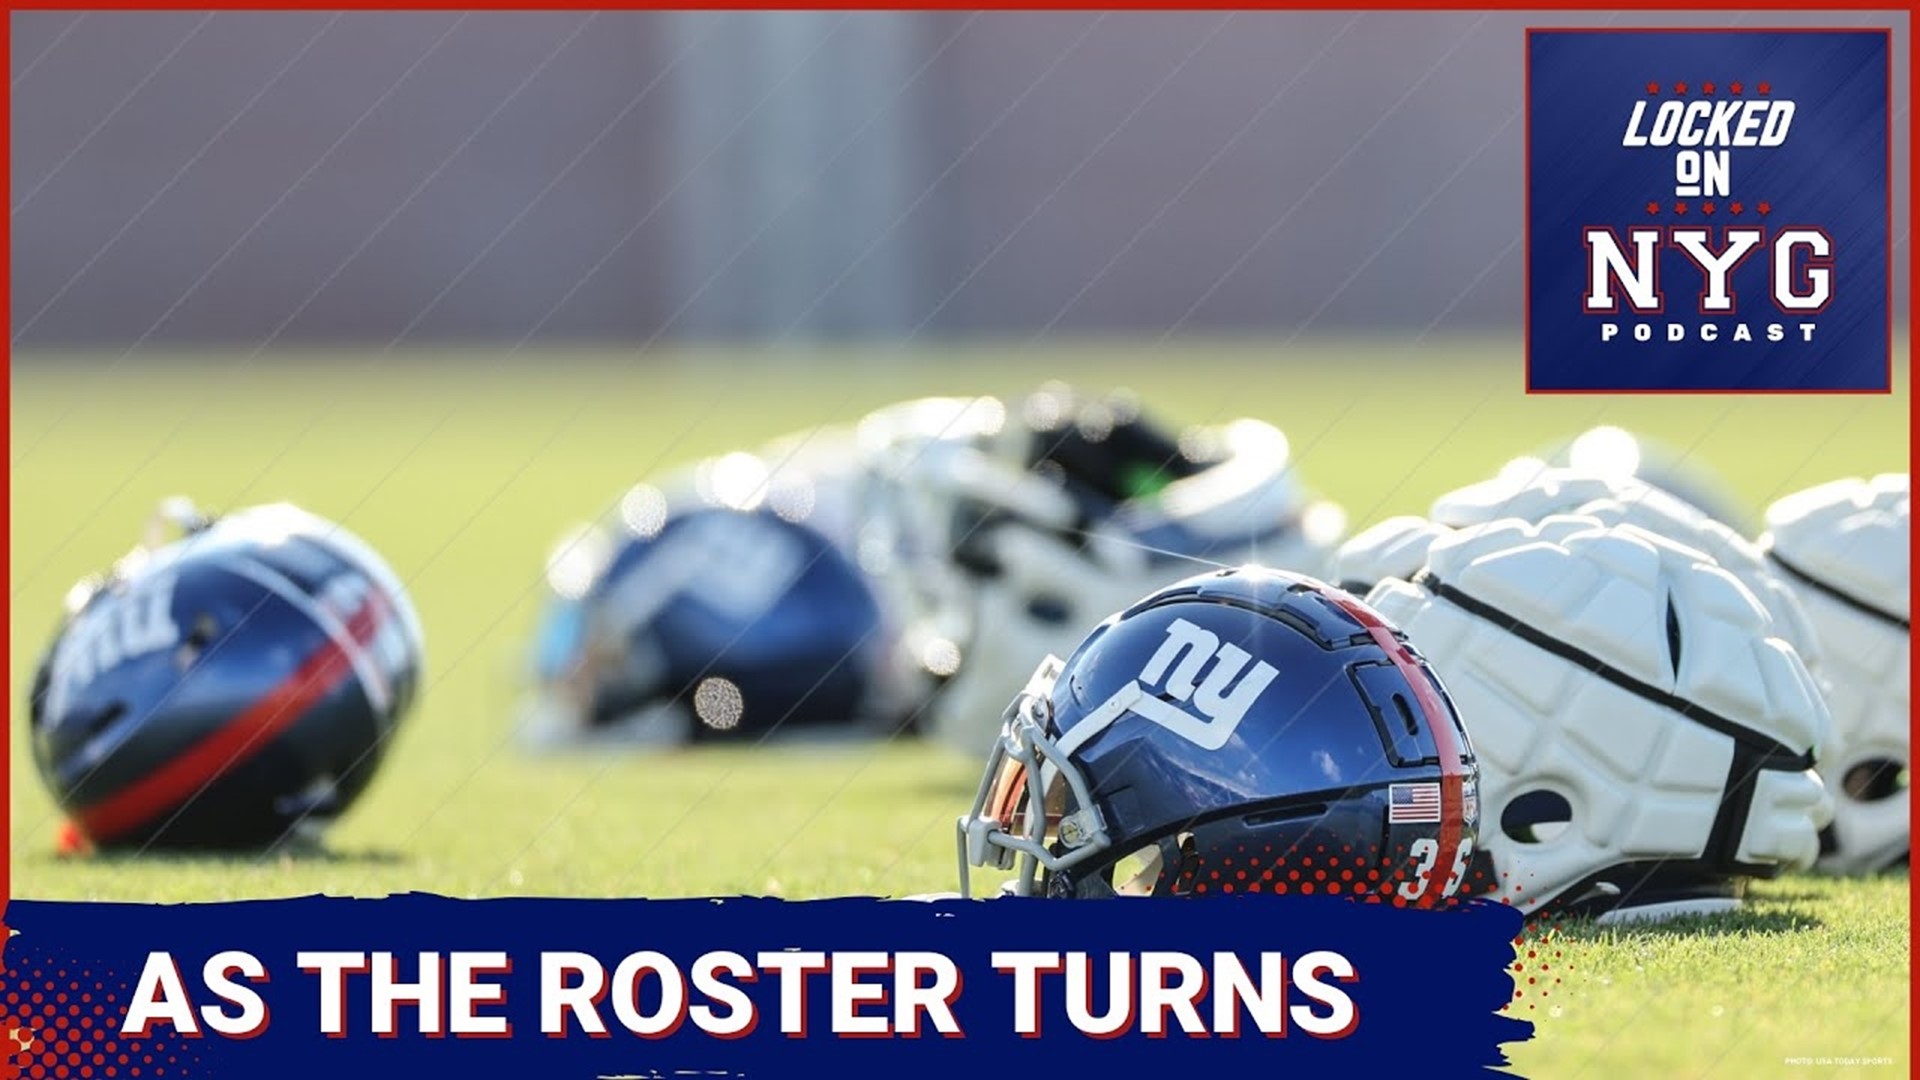 The New York Giants have been very busy turning over the roster. We have a rundown of the latest moves, plus a look at what's left to do.